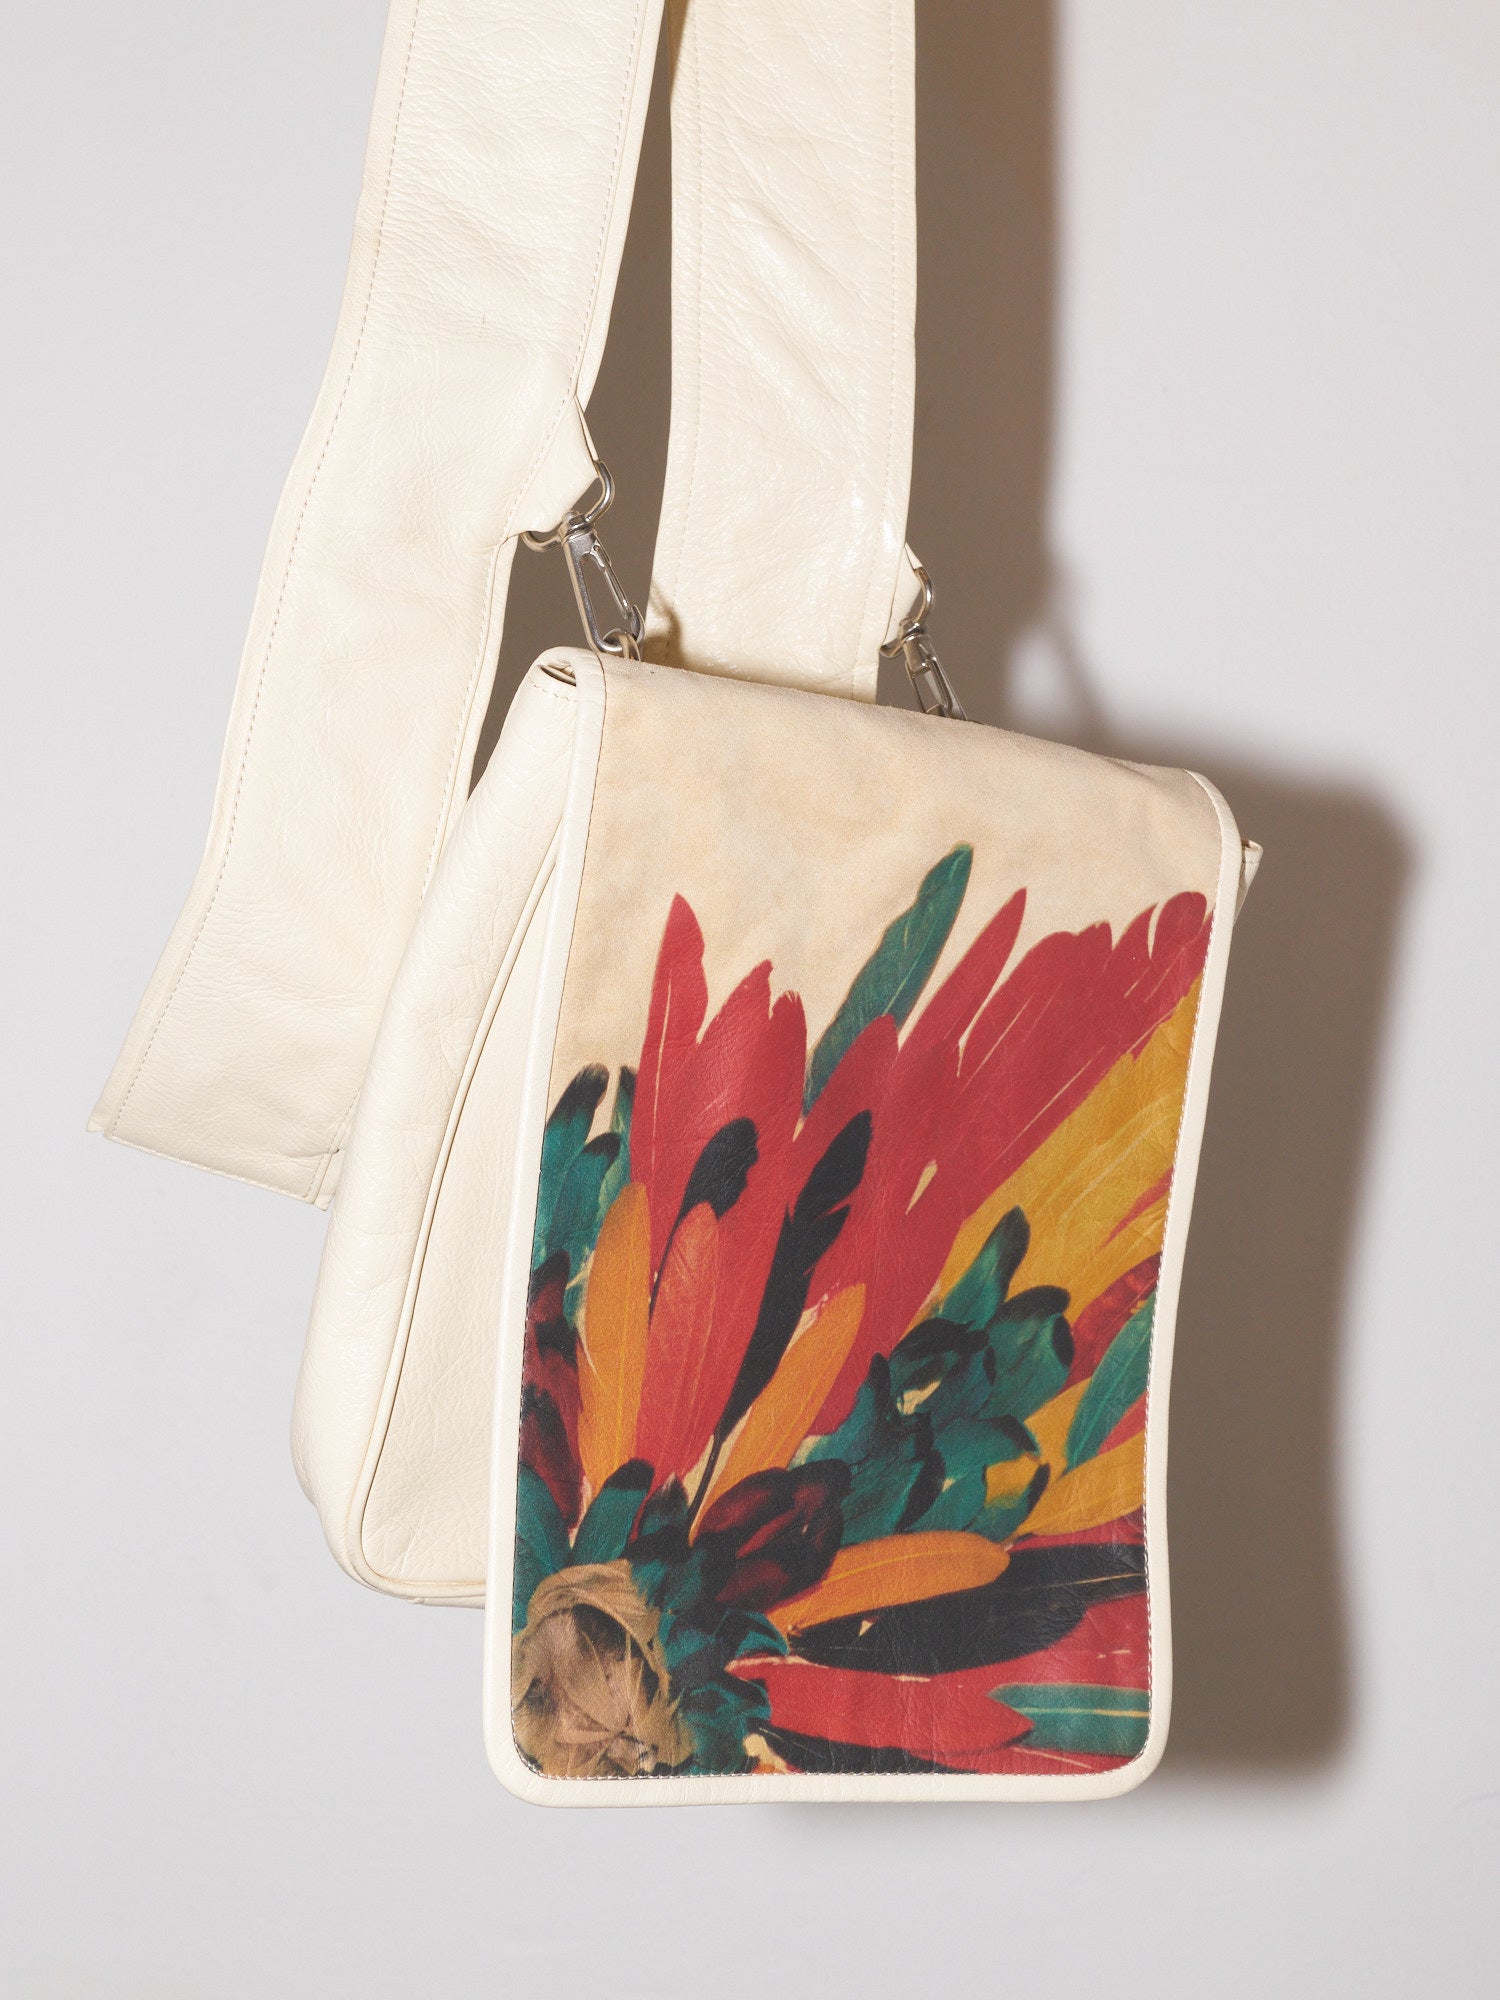 Masaki Matsushima Homme cream leather cross-body bag with feather print flap